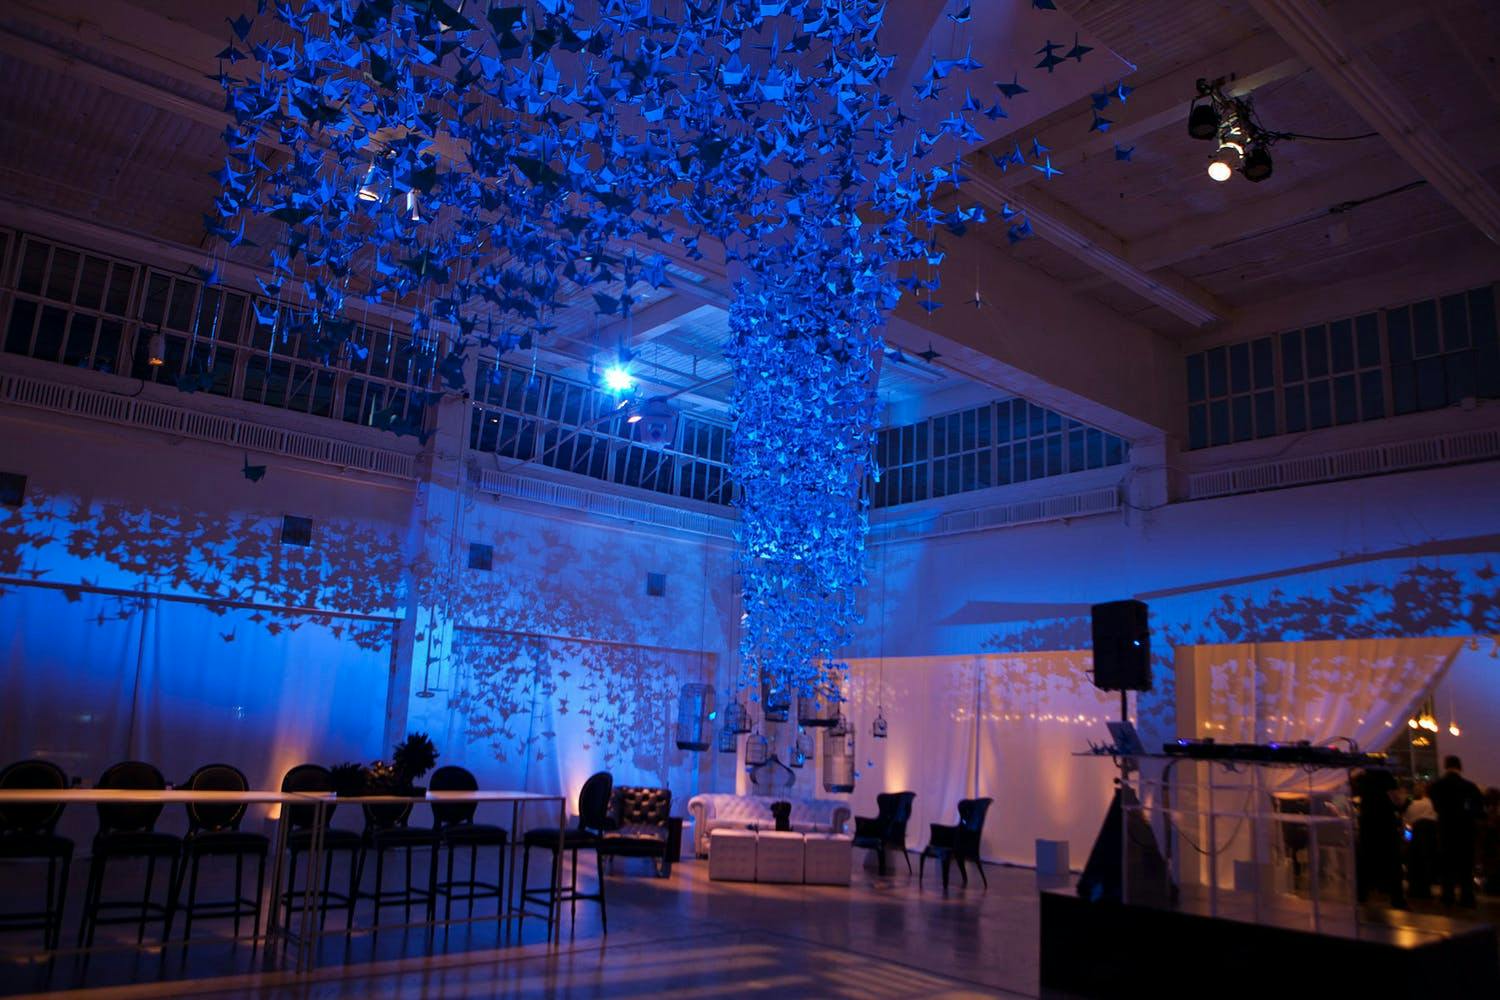 Ceiling installation of bright blue cranes against blue uplighting at wedding | PartySlate